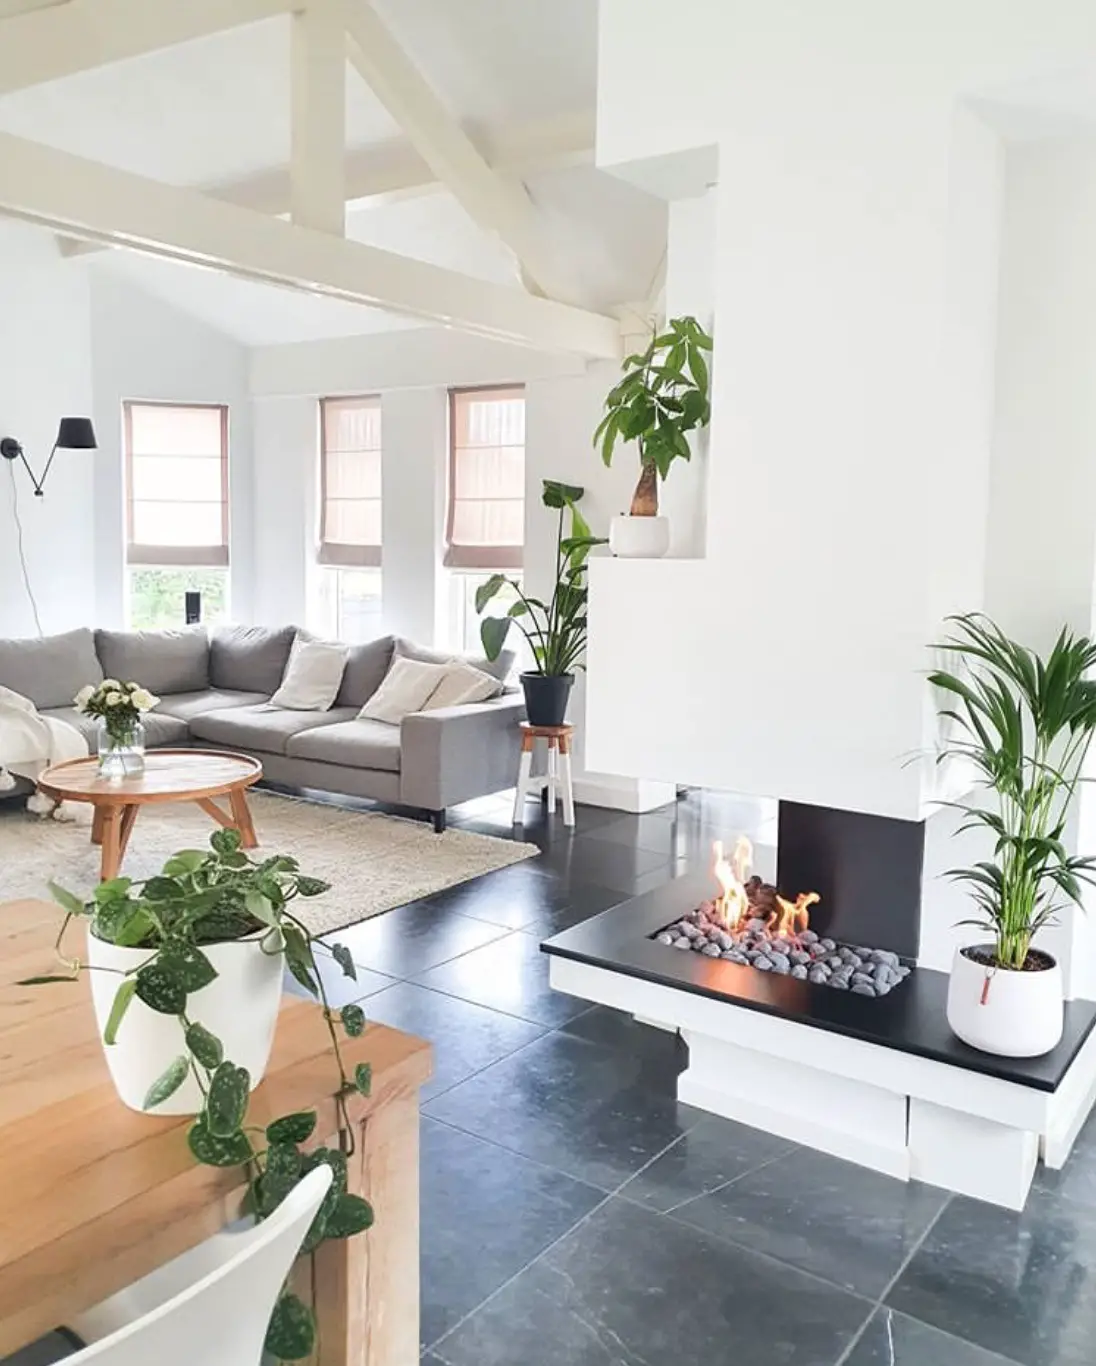 Living Room Decoration Ideas With Plants - How to Decorate with Indoor Plants